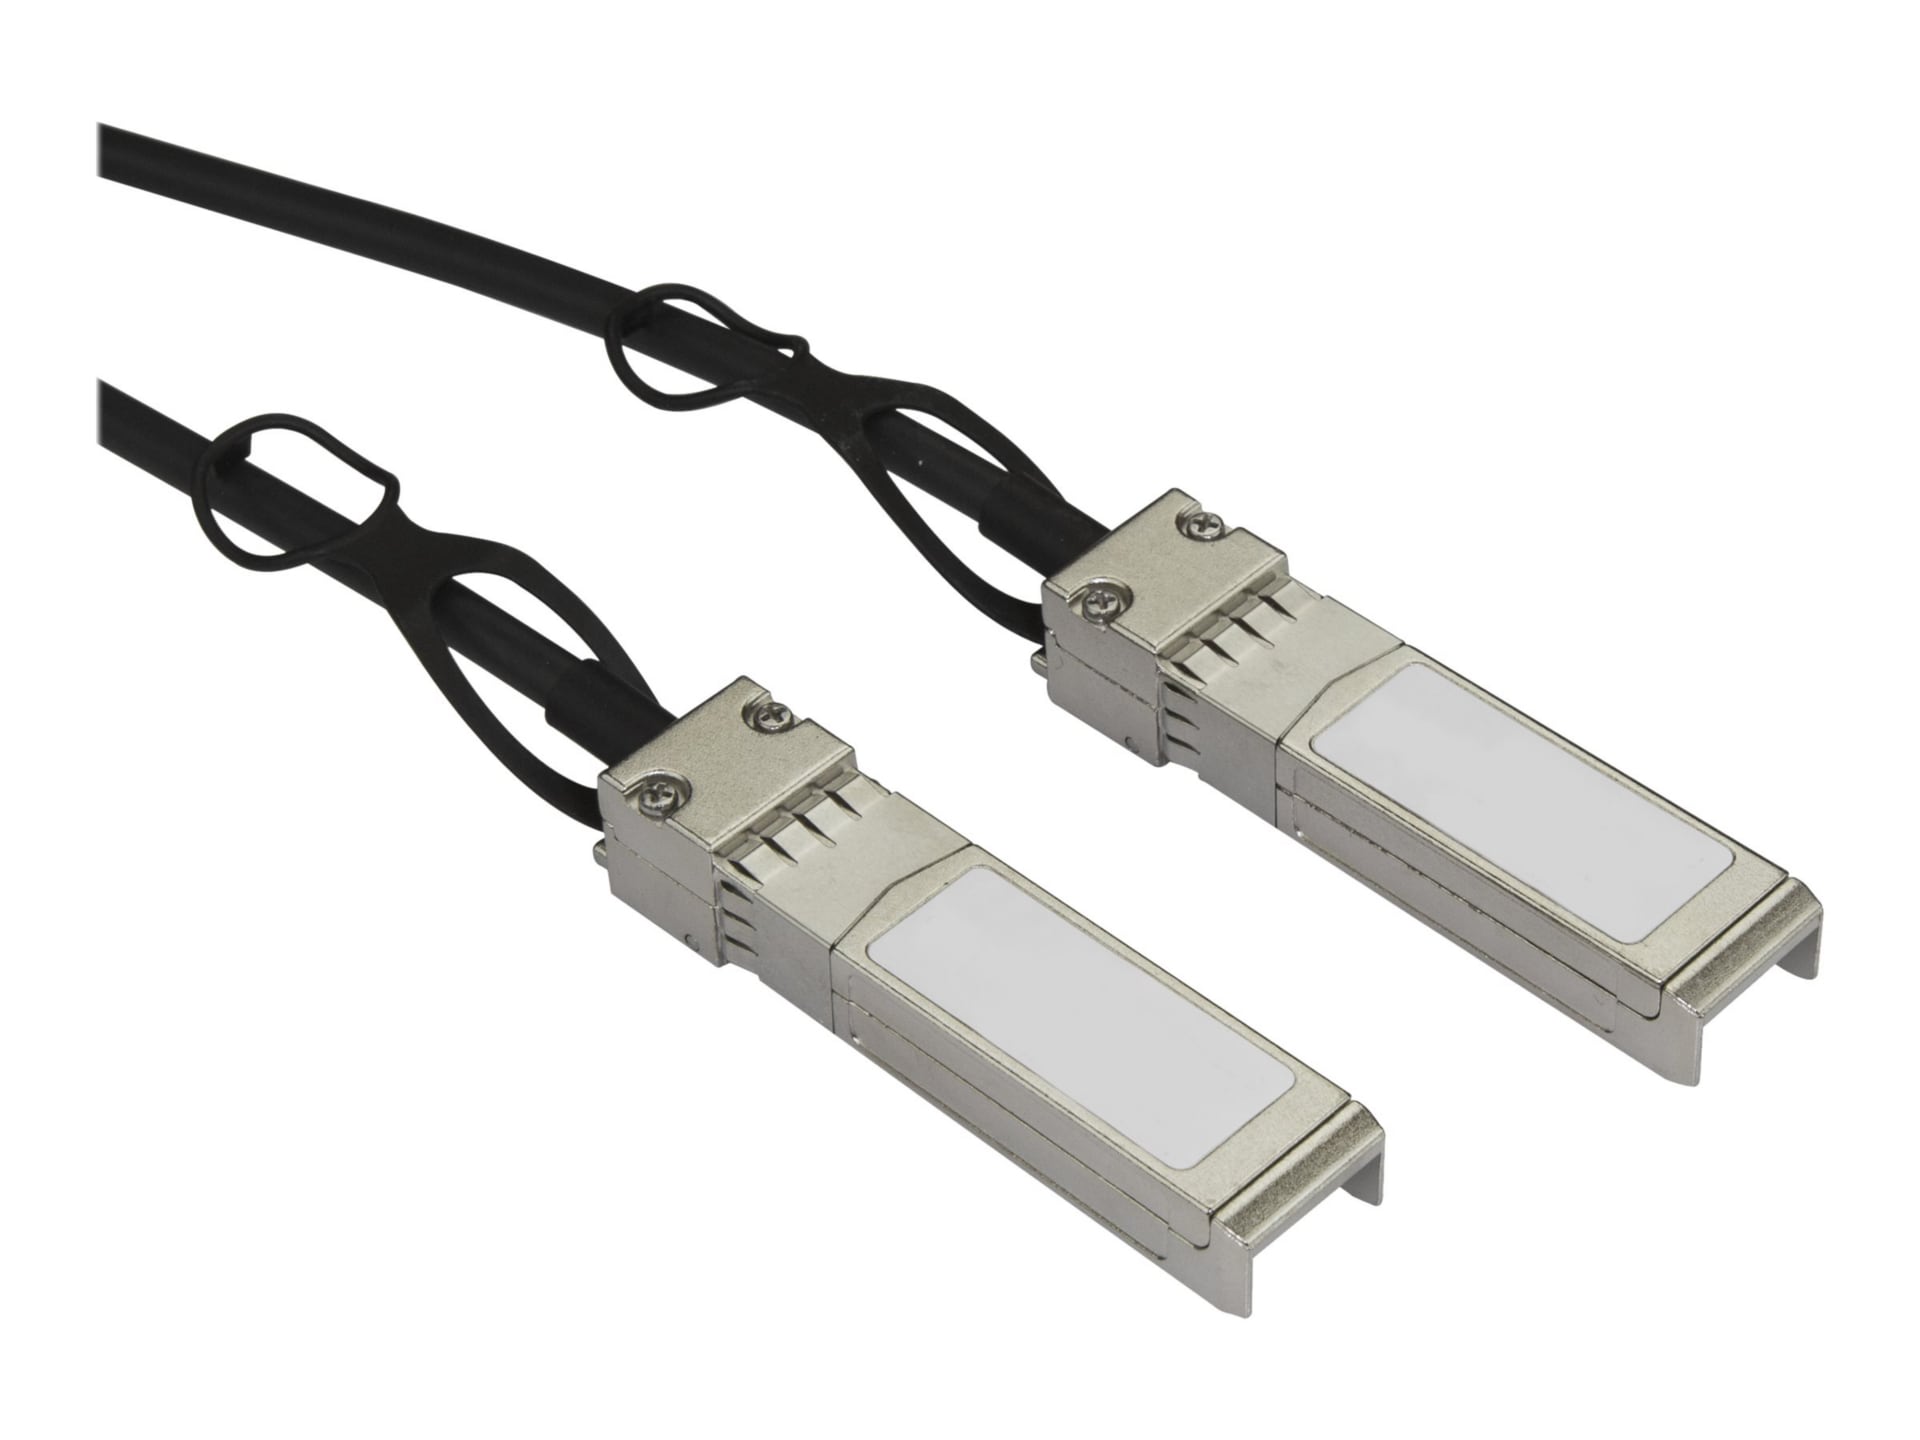 StarTech.com MSA Uncoded Compatible 2m 10G SFP+ to SFP+ Direct Attach Cable